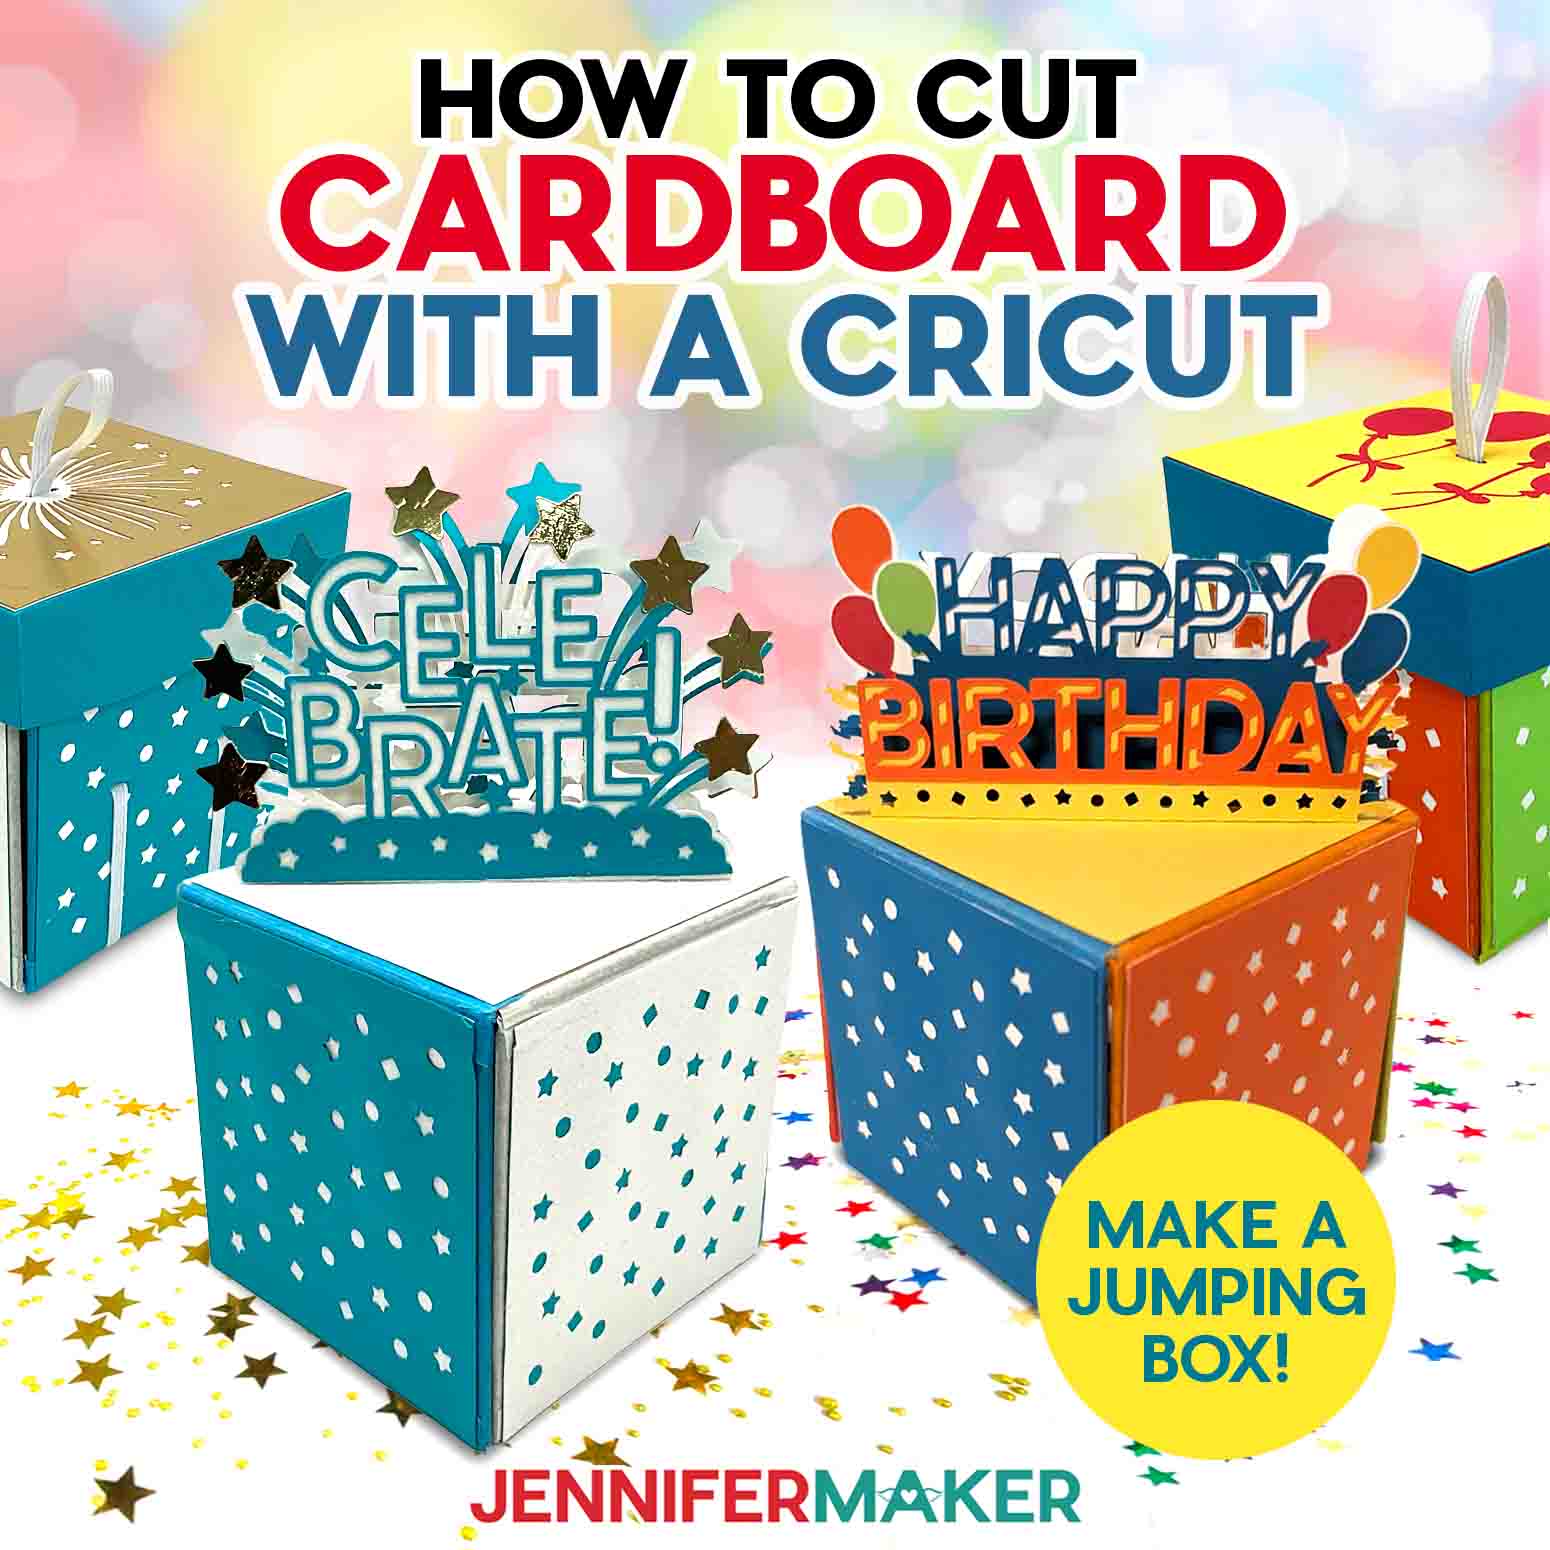 Make A Jumping Box: How To Cut Cardboard With Cricut